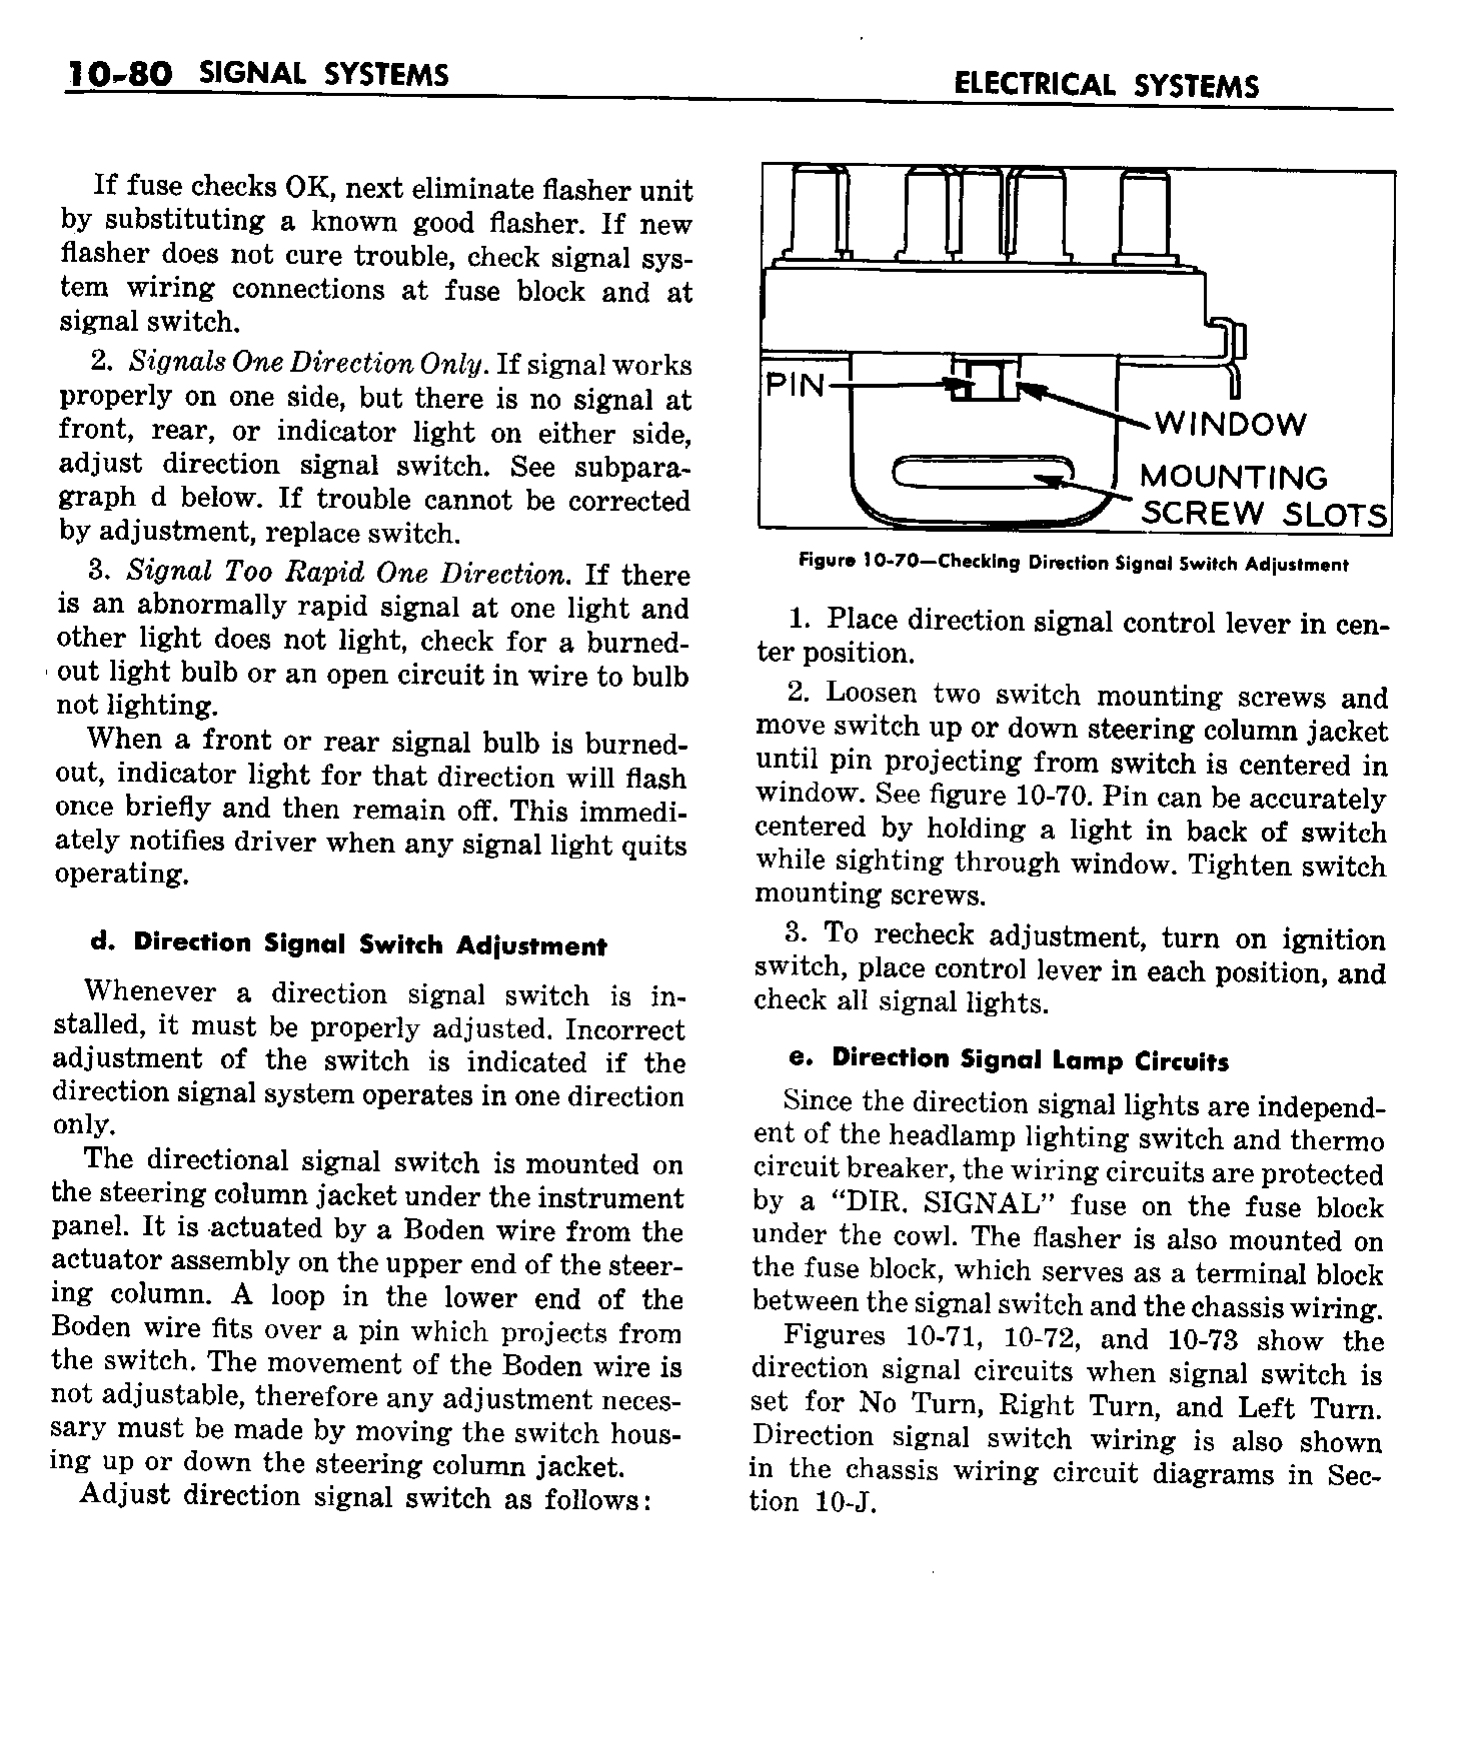 n_11 1958 Buick Shop Manual - Electrical Systems_80.jpg